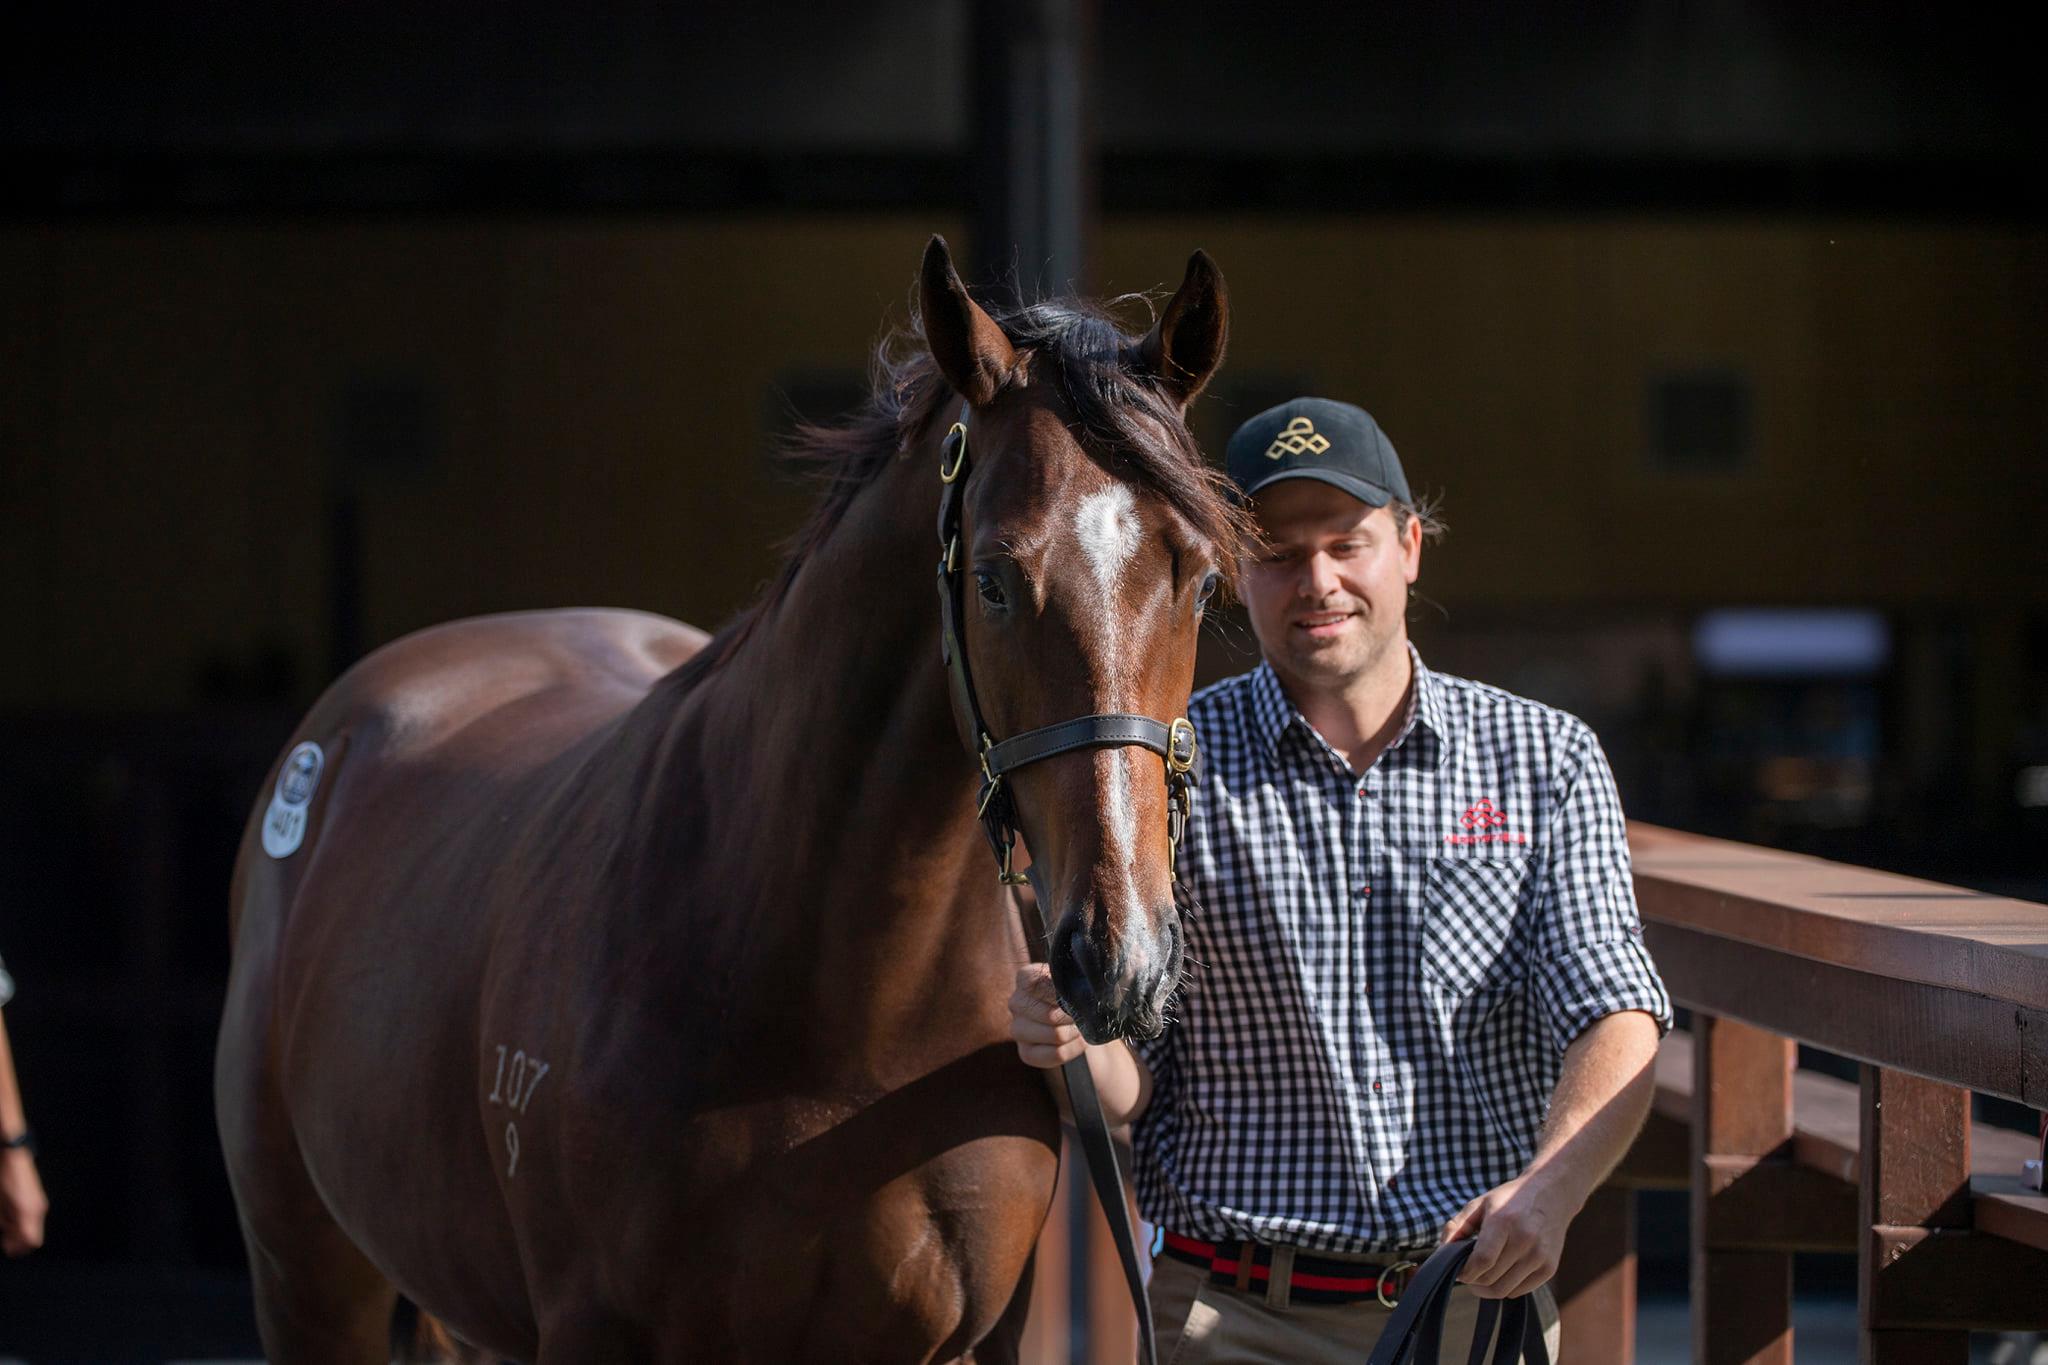 The final yearling by Redoute's Choice to sell at auction. Picture: Magic Millions.